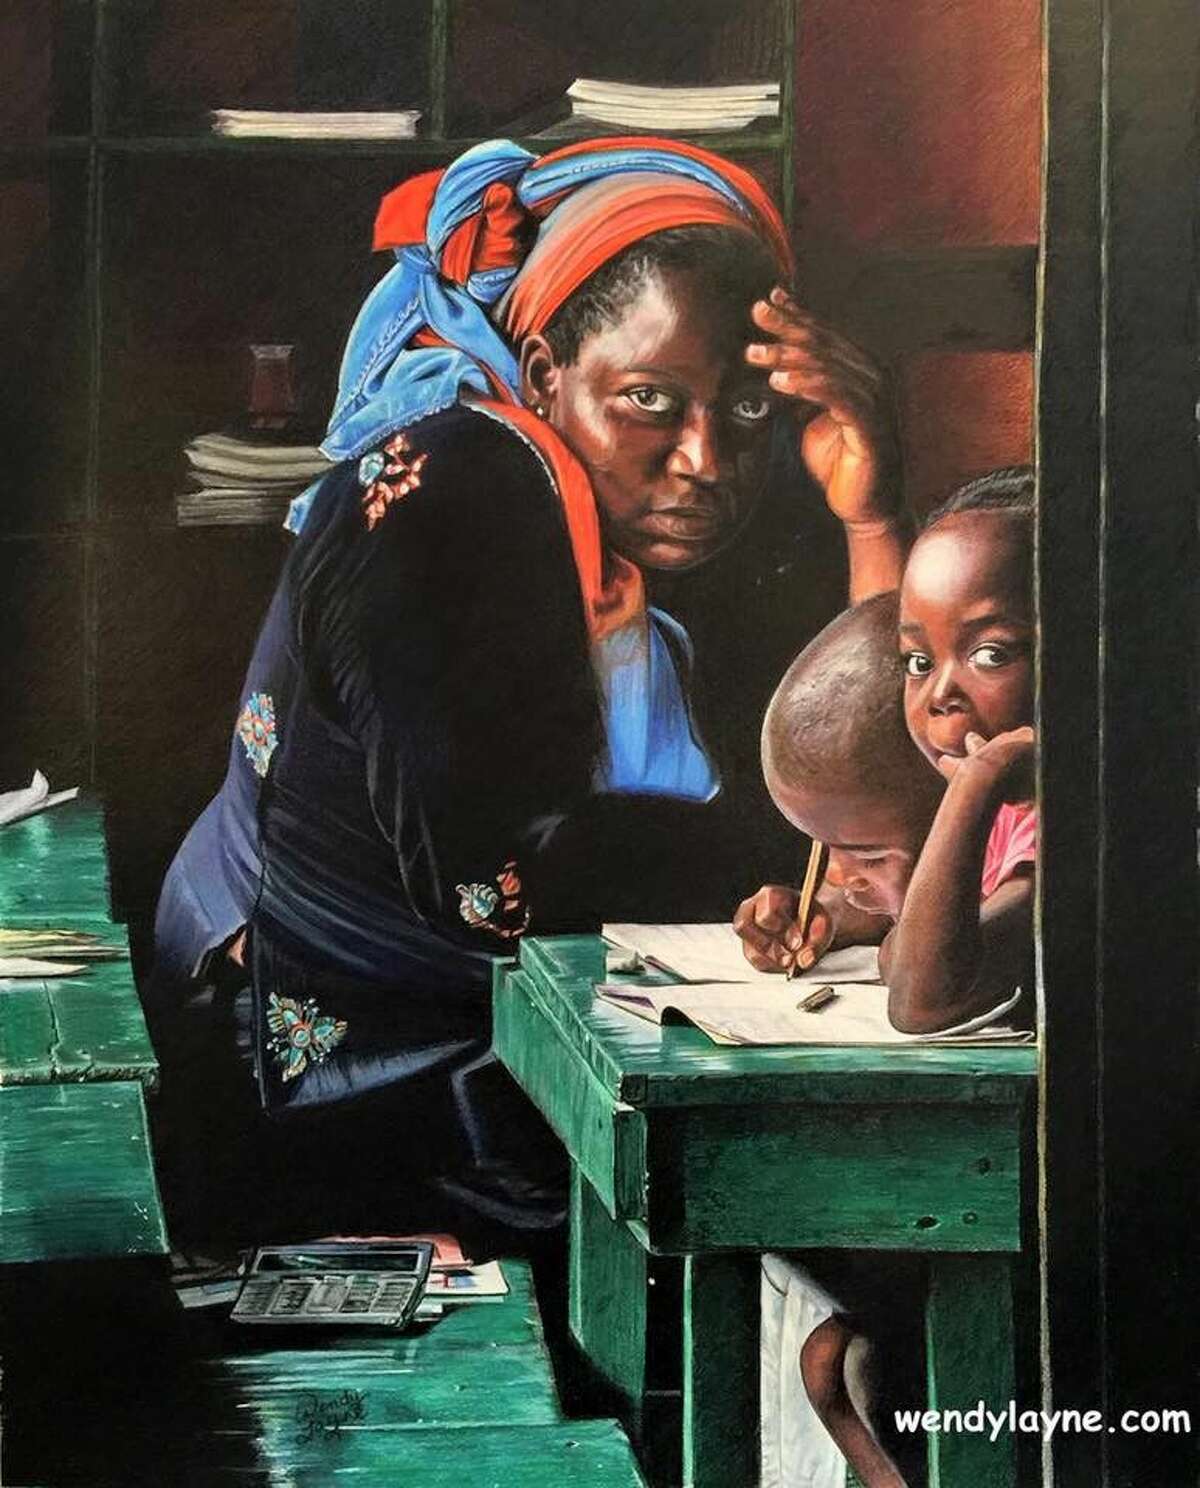 A colored-pencil painting by Wendy Layne titled “Teacher,” which won Best of Show at the July 29-30 Lone Star Art Guild Convention competition.